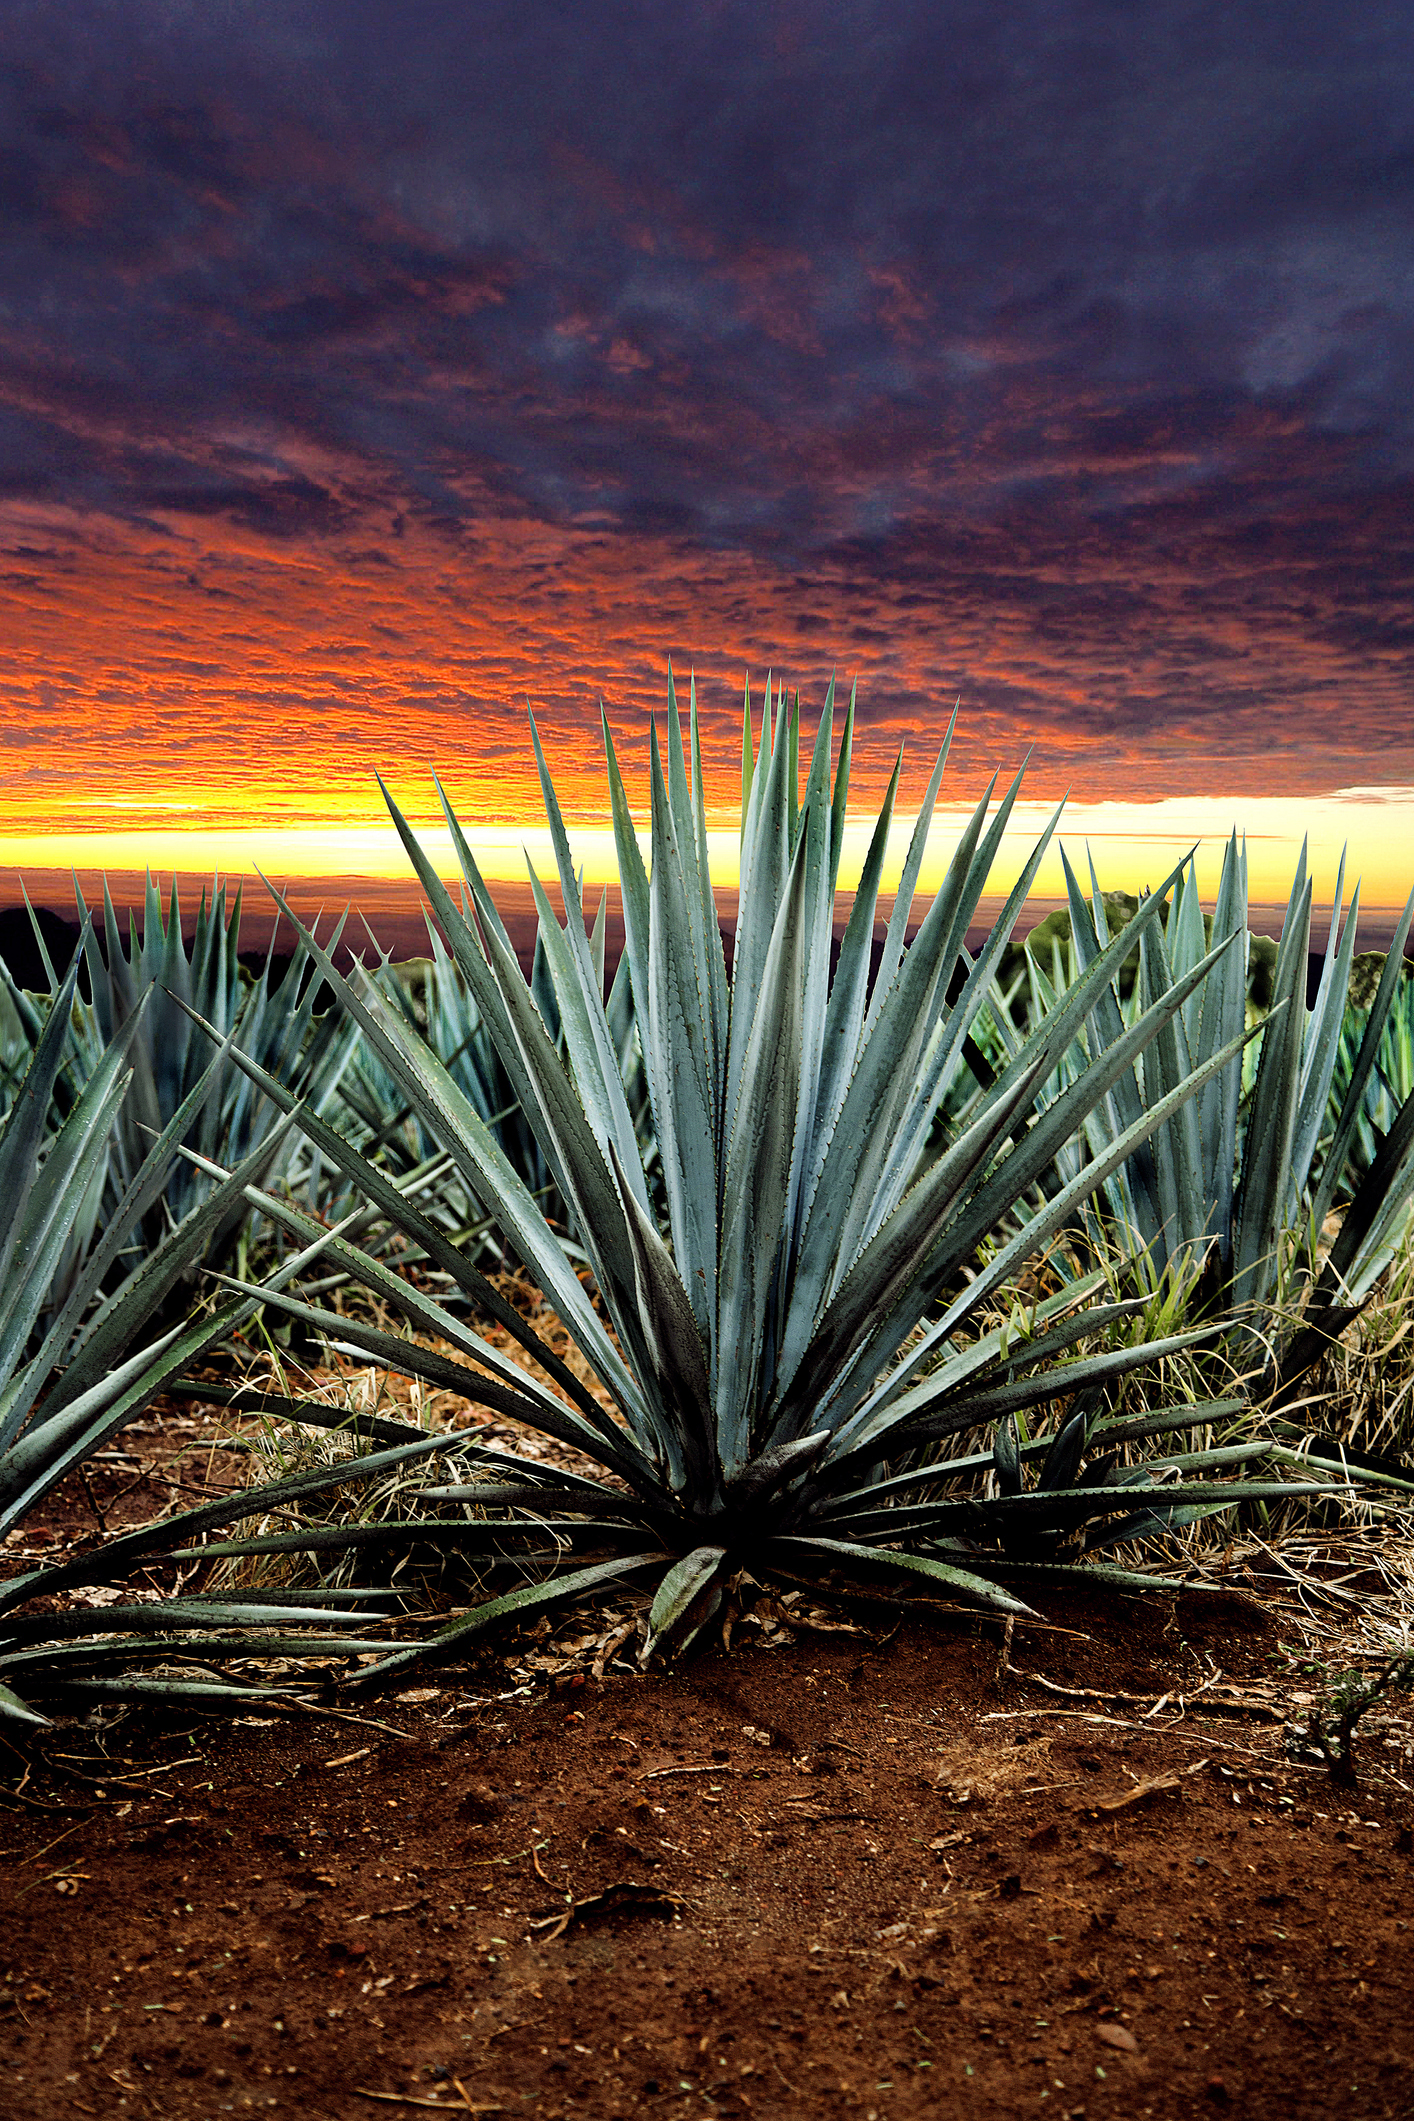 An agave farm in Jalisco, Mexico. Agave is used to make mezcal and tequila.